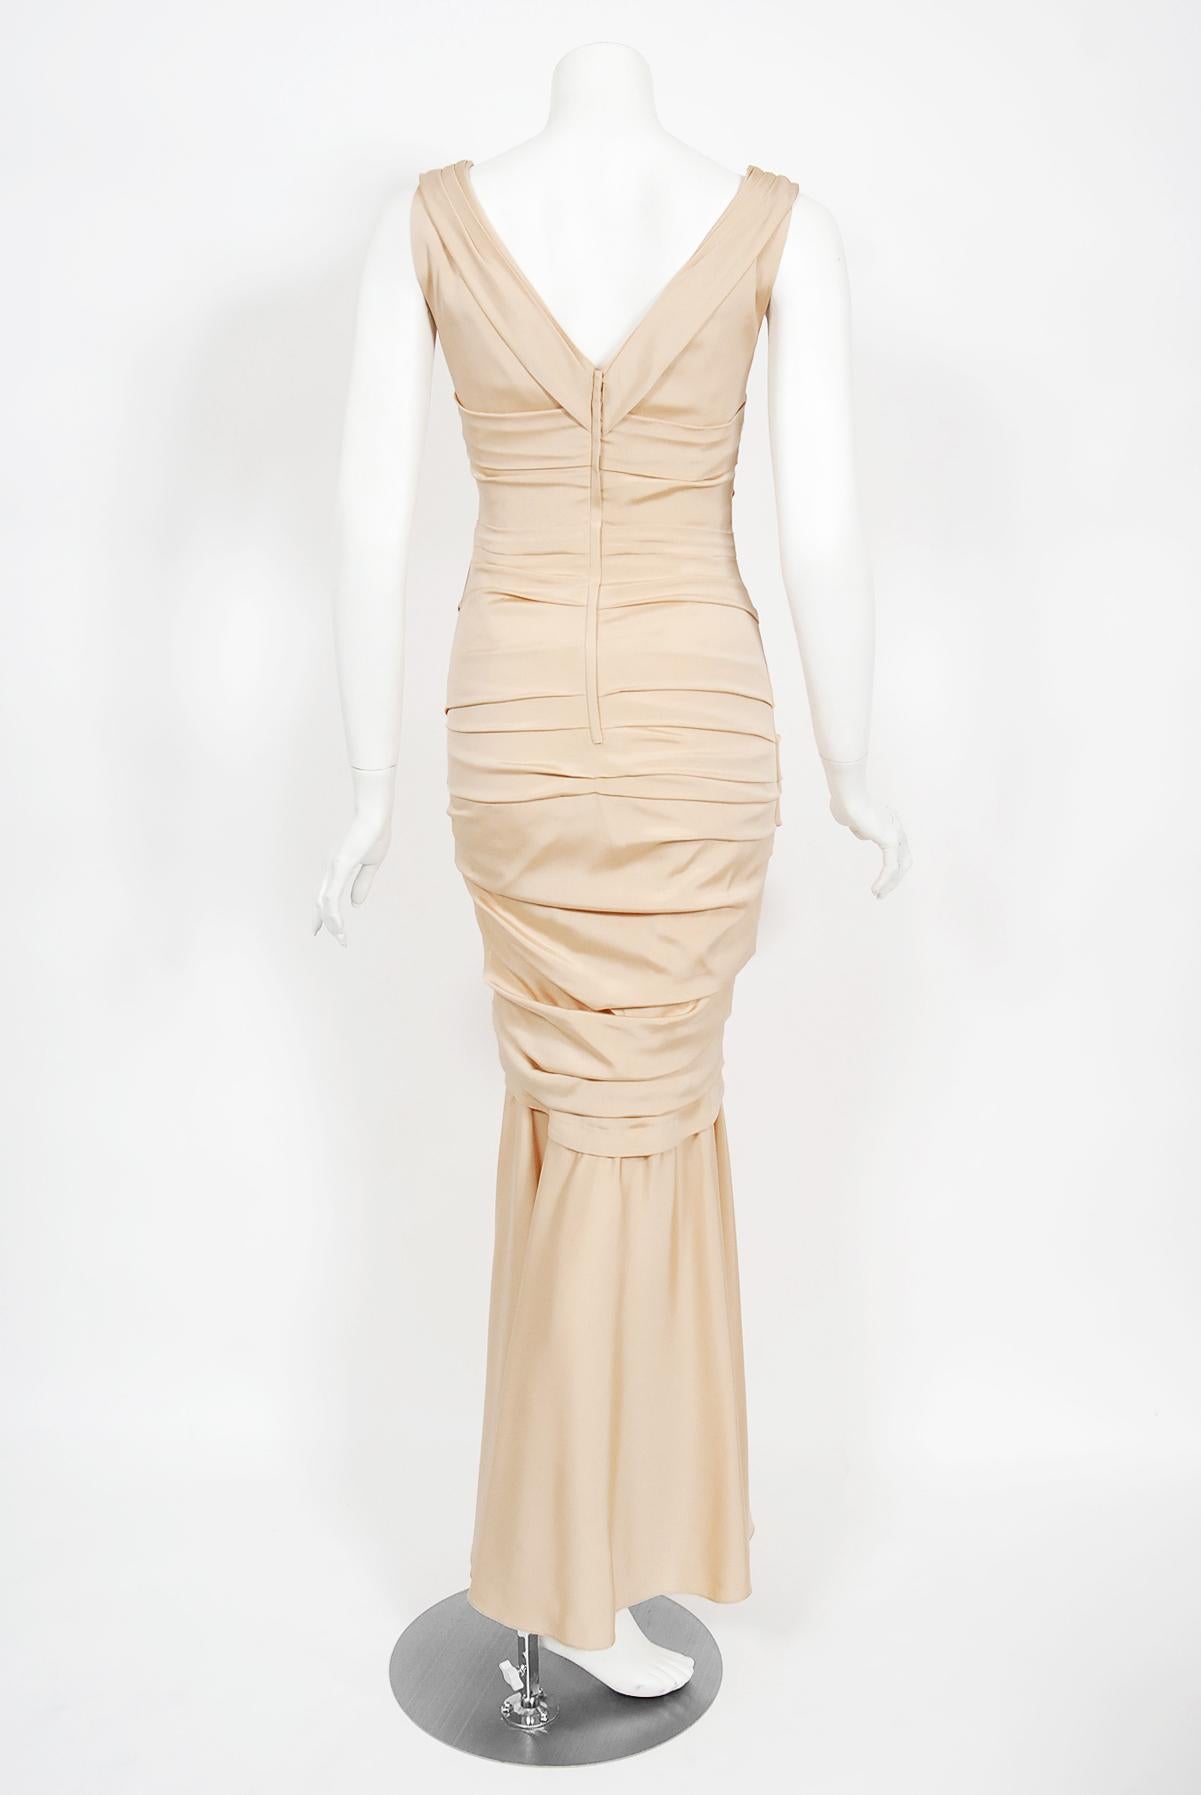 Vintage 2013 Dolce & Gabbana Naked Nude Ruched Stretch Silk Hourglass Gown  7